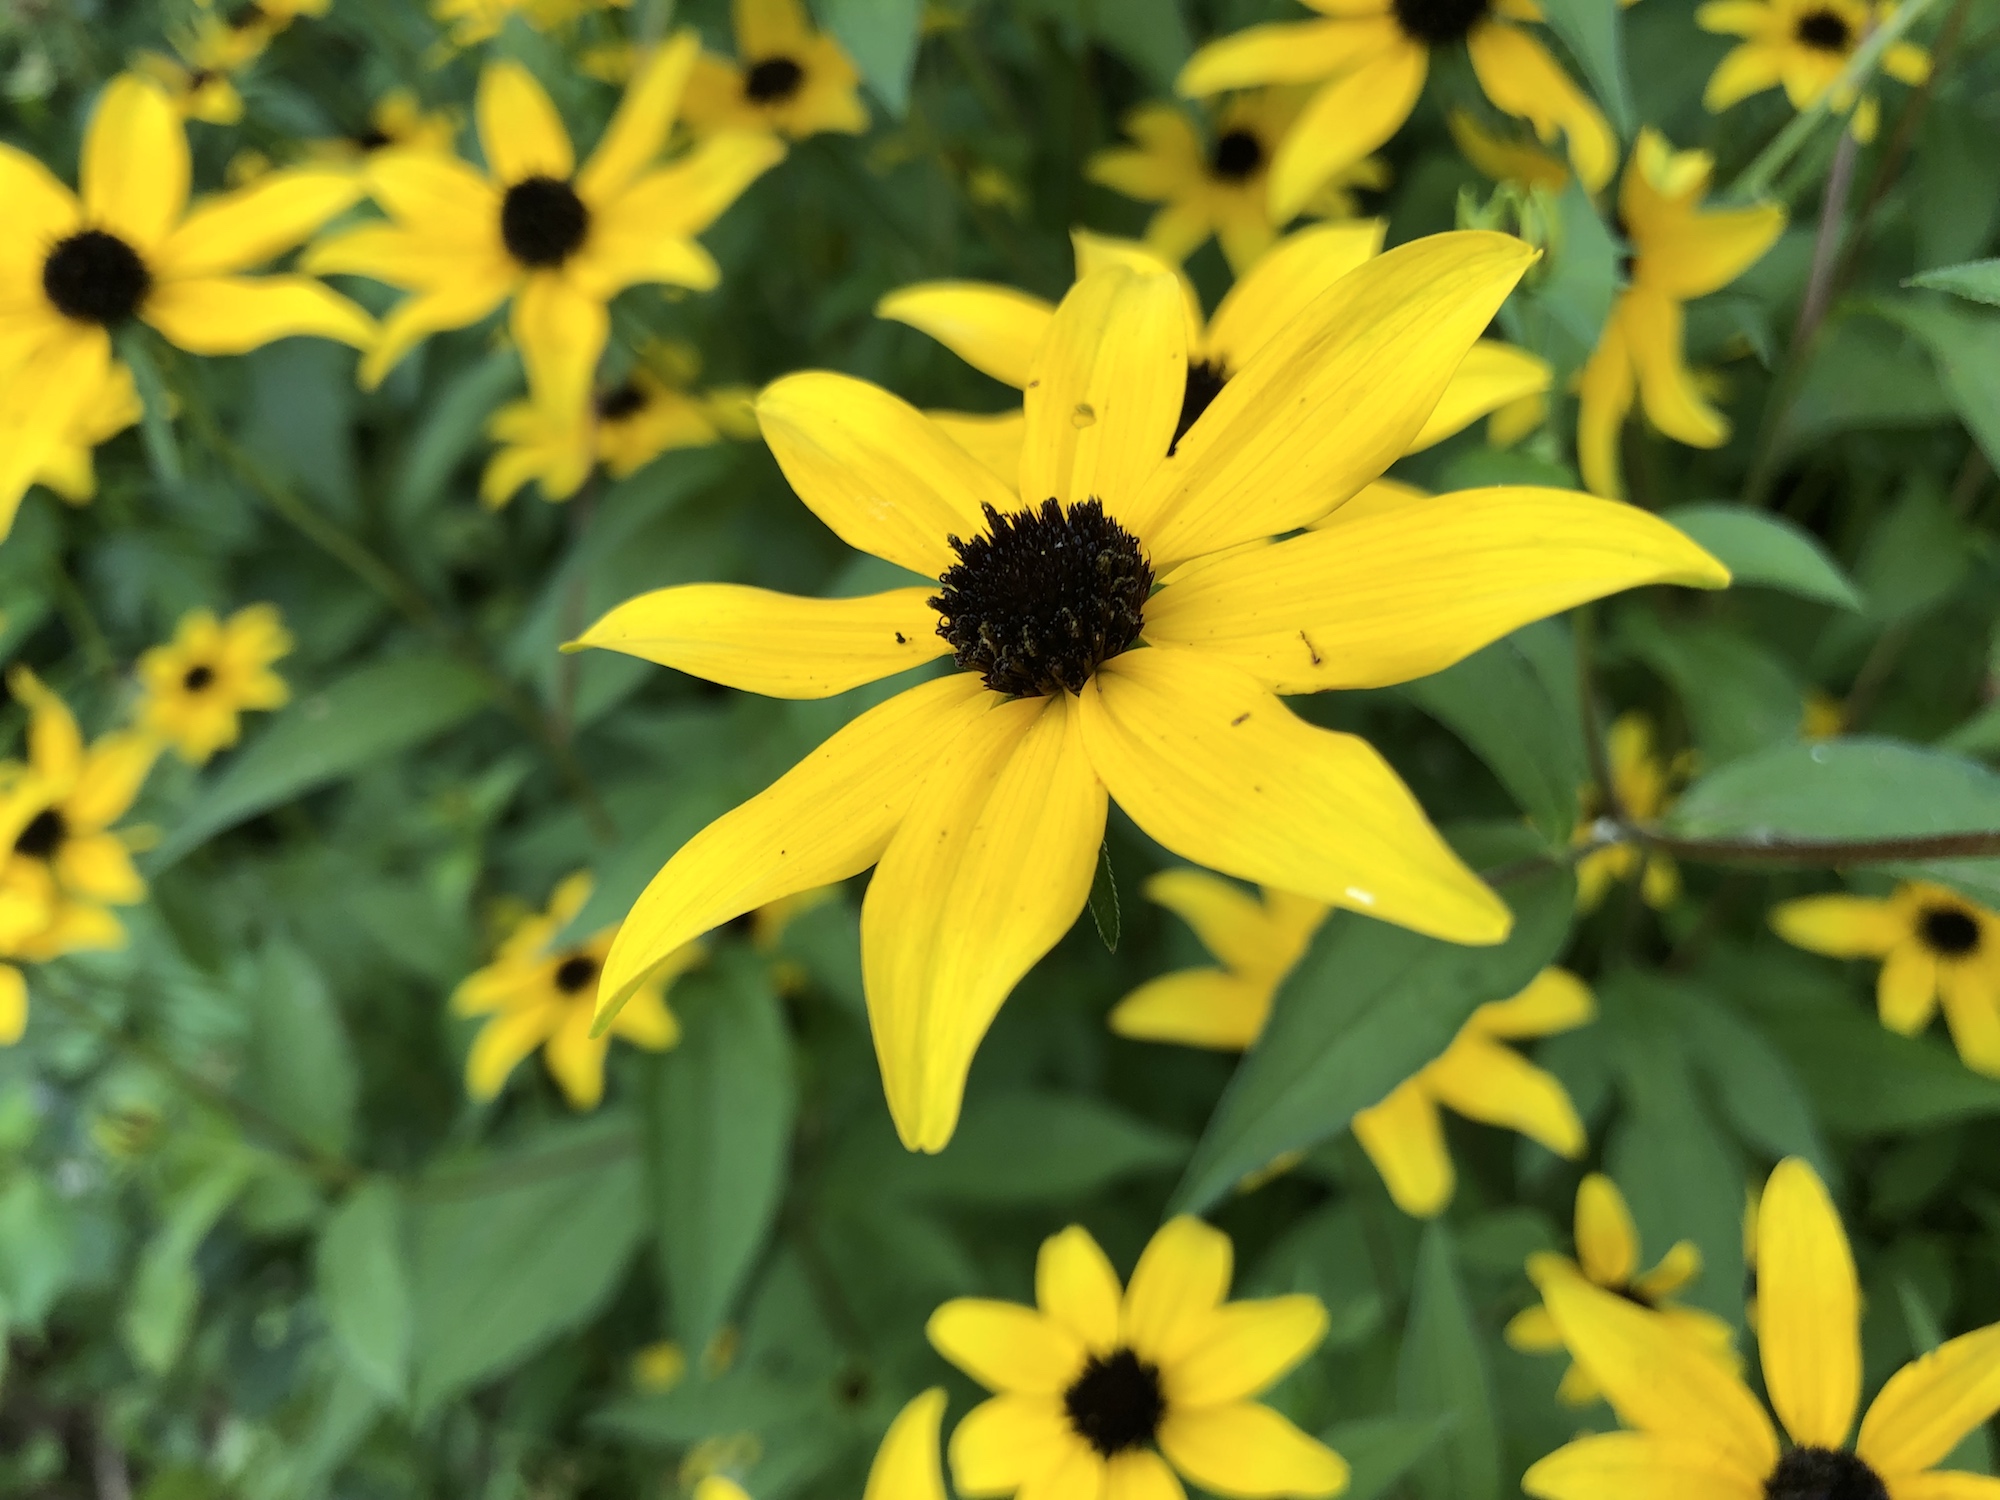 Brown-eyed Susan on banks of retaining pond in Madison, Wisconsin on July 25, 2019.